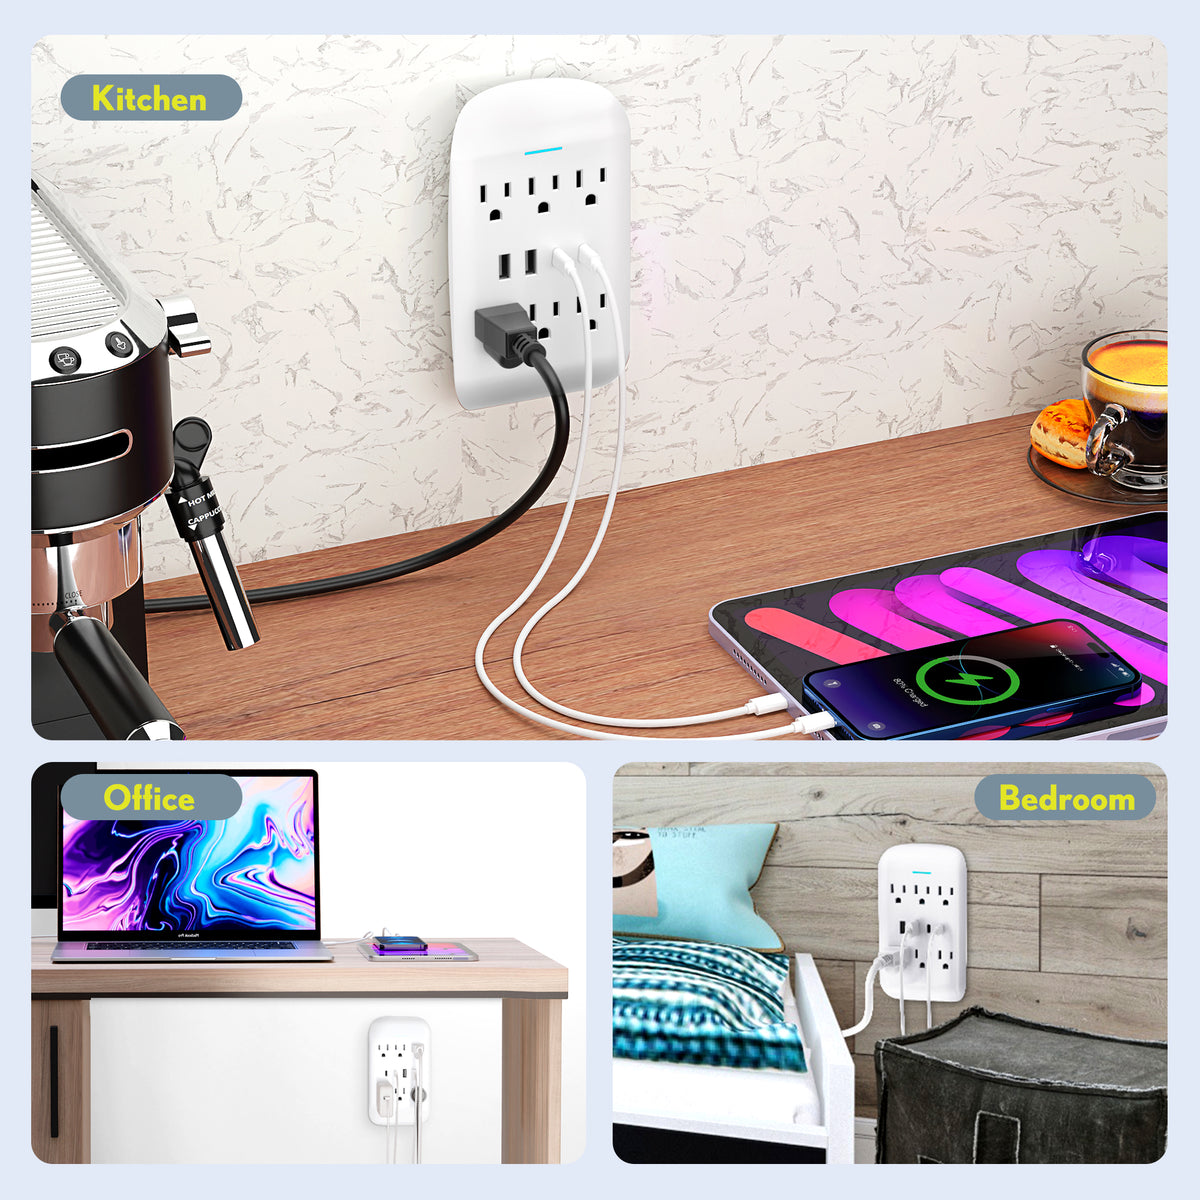 Outlet Extender 10-Port Wall Charger Surge Protector with Lightning Cable (4ft)